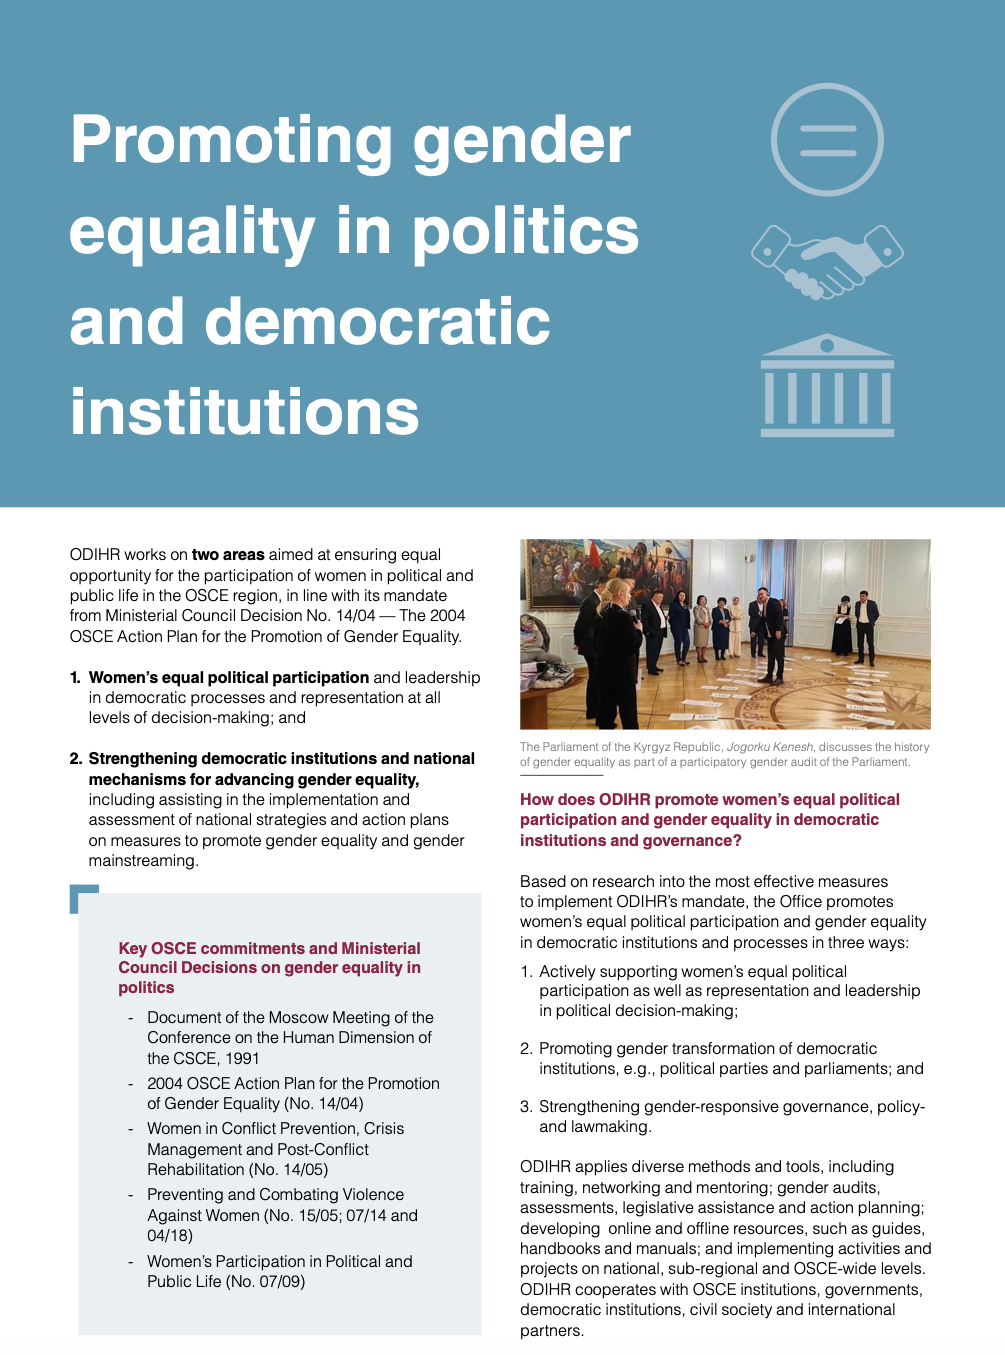 Promoting gender equality in politics and democratic institutions